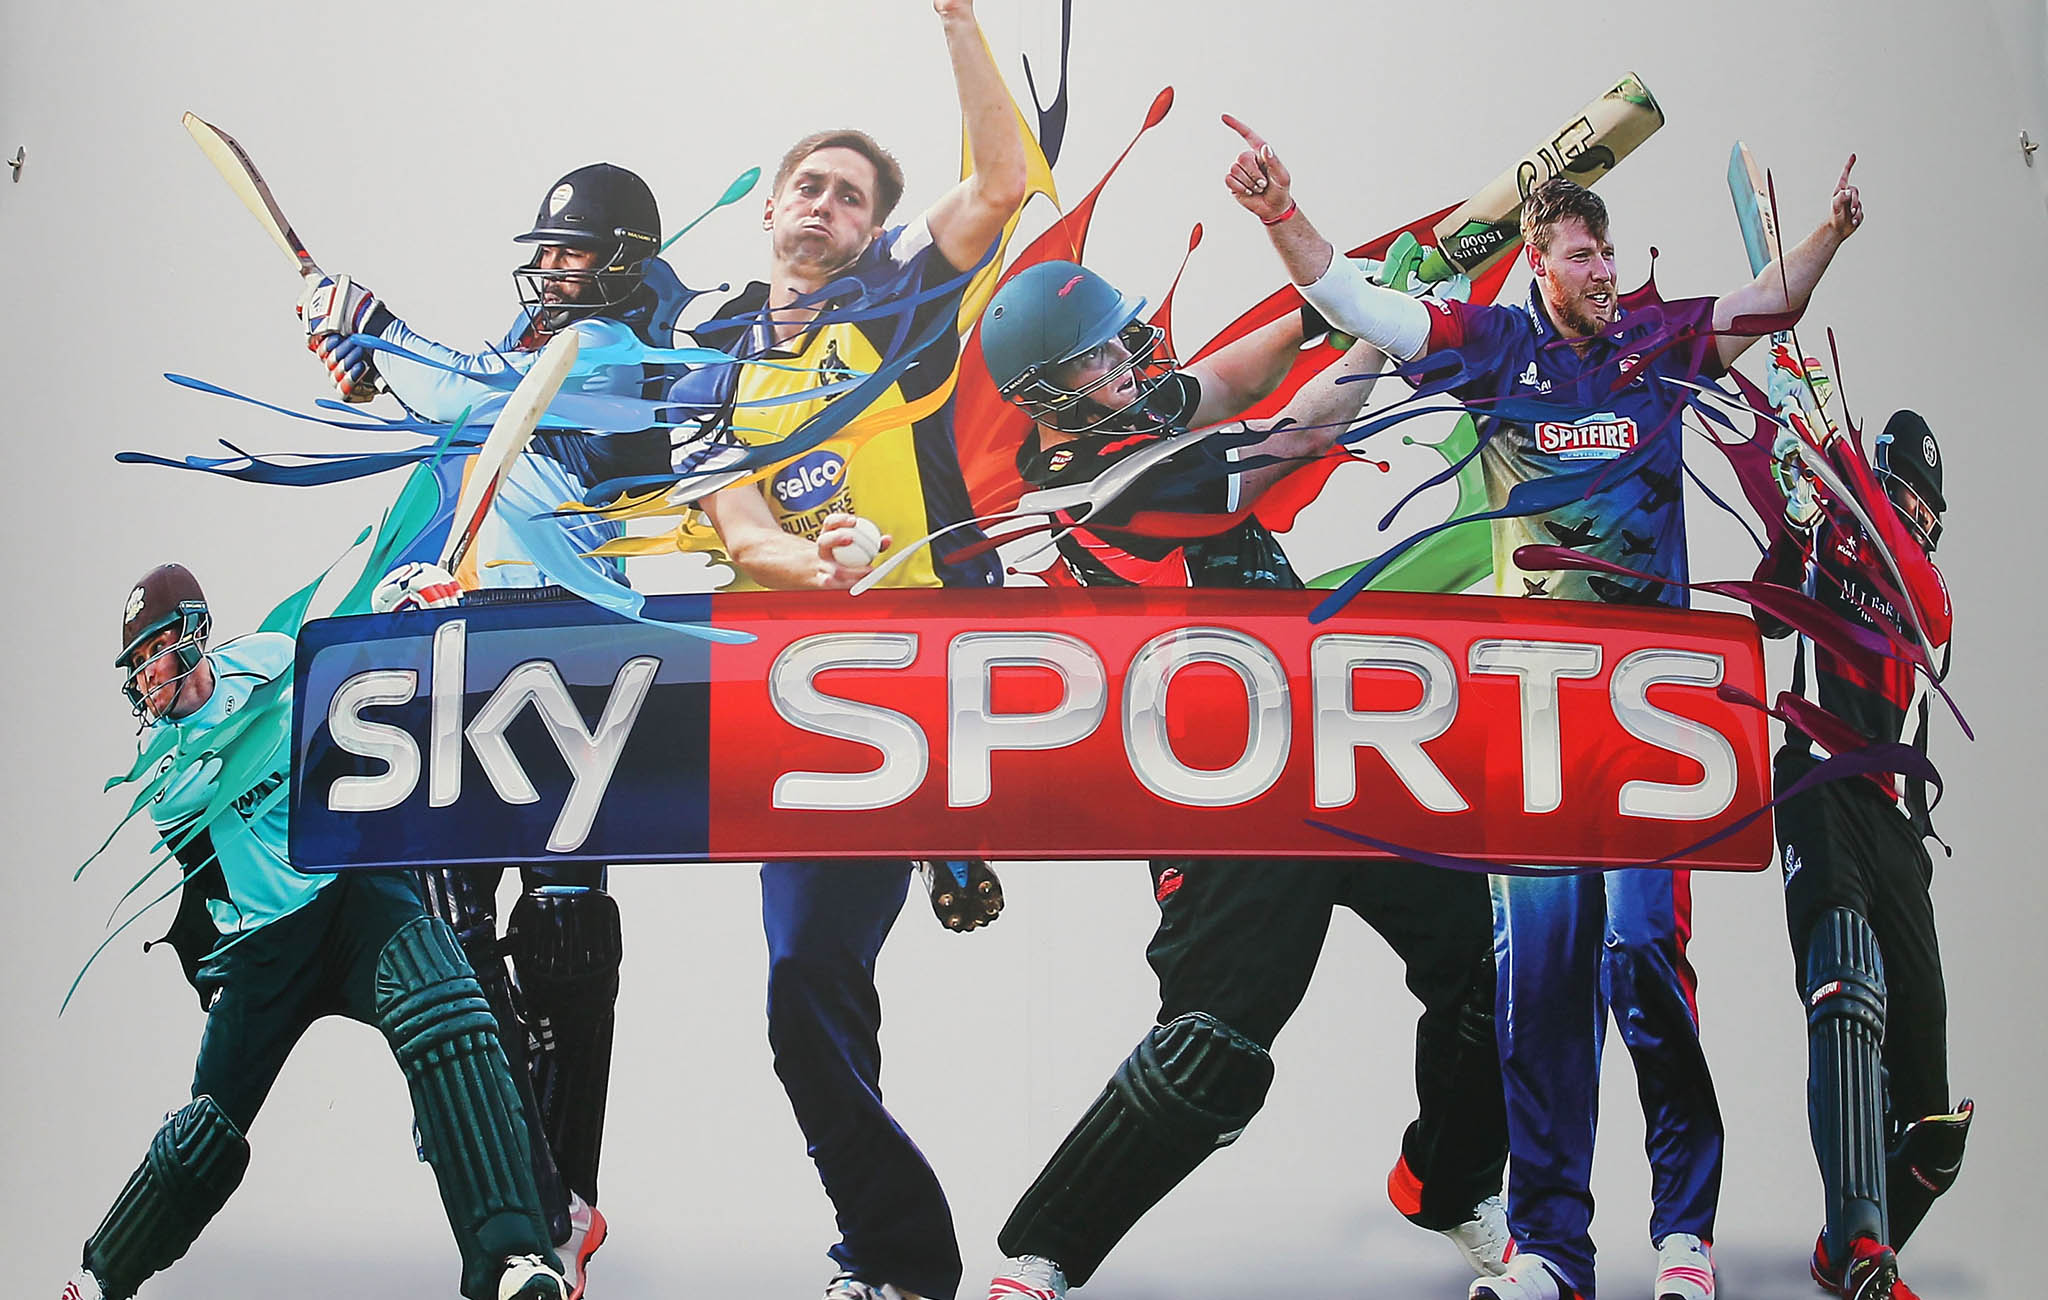 The shift could help Sky when it comes to bidding for sports rights